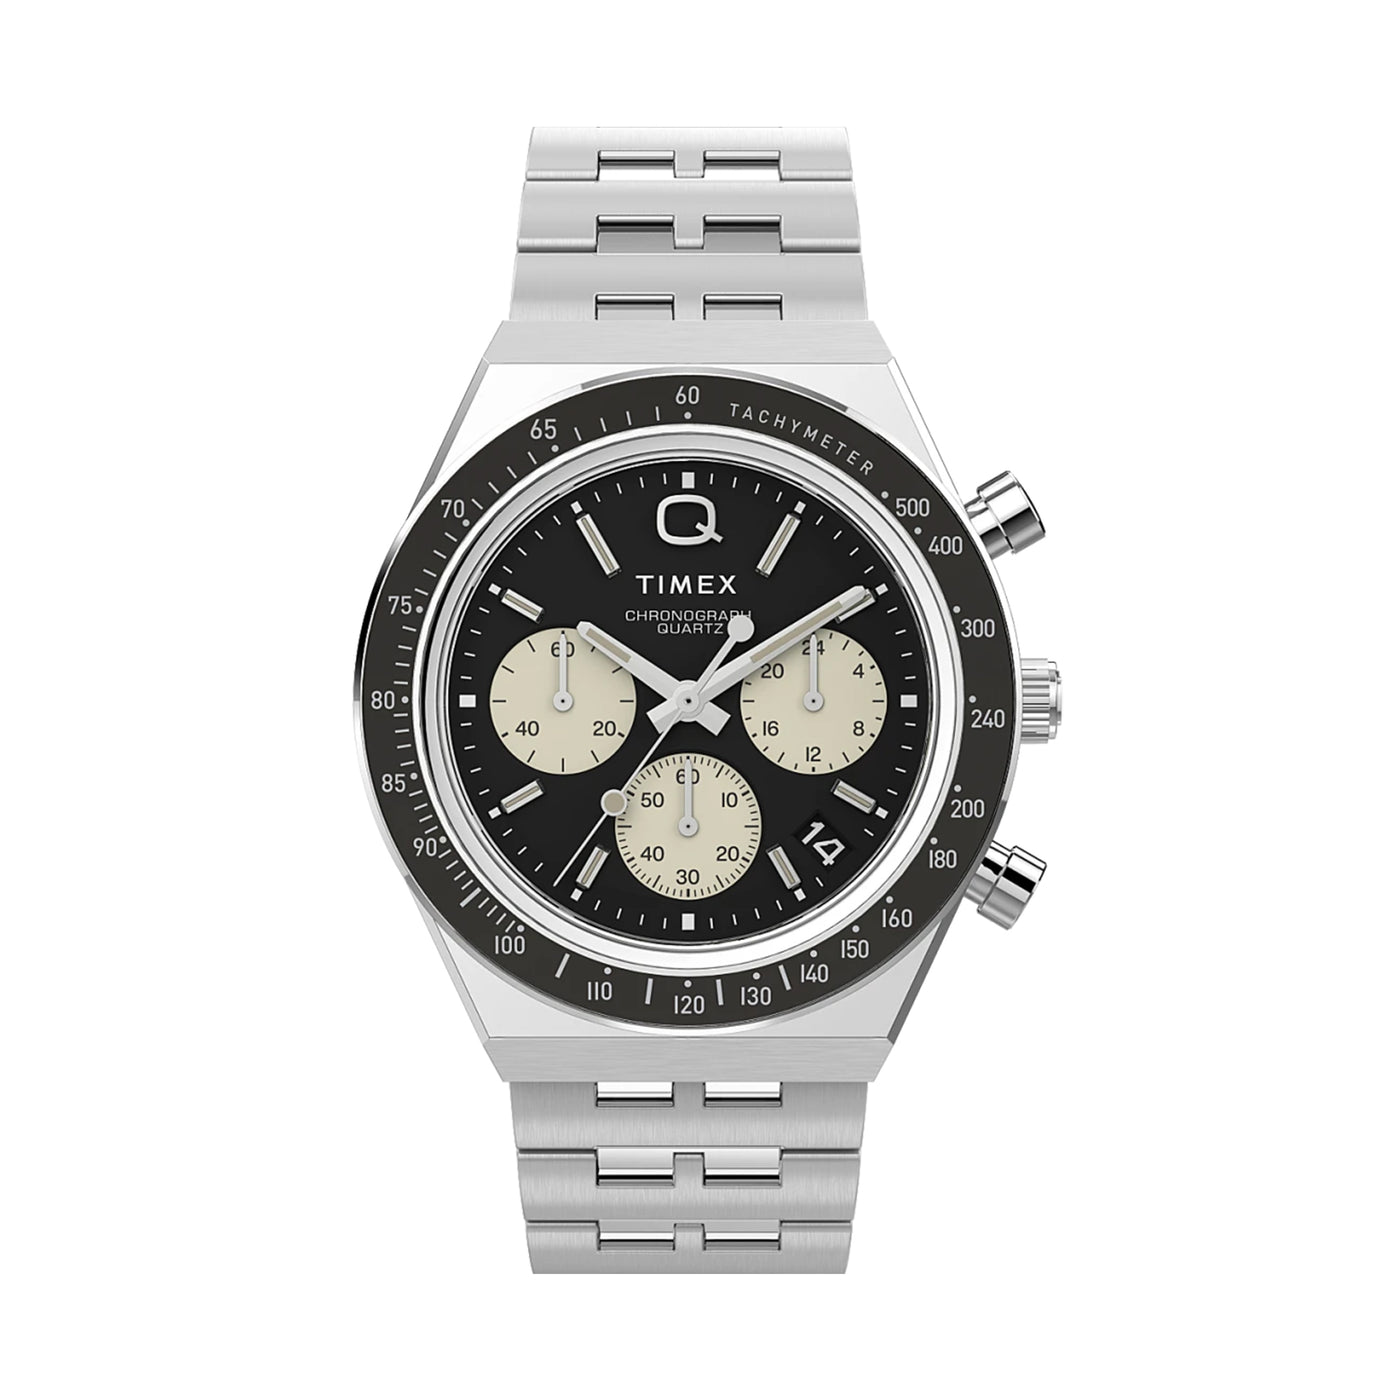 Timex Q Timex Chronograph 40mm Stainless Steel Band